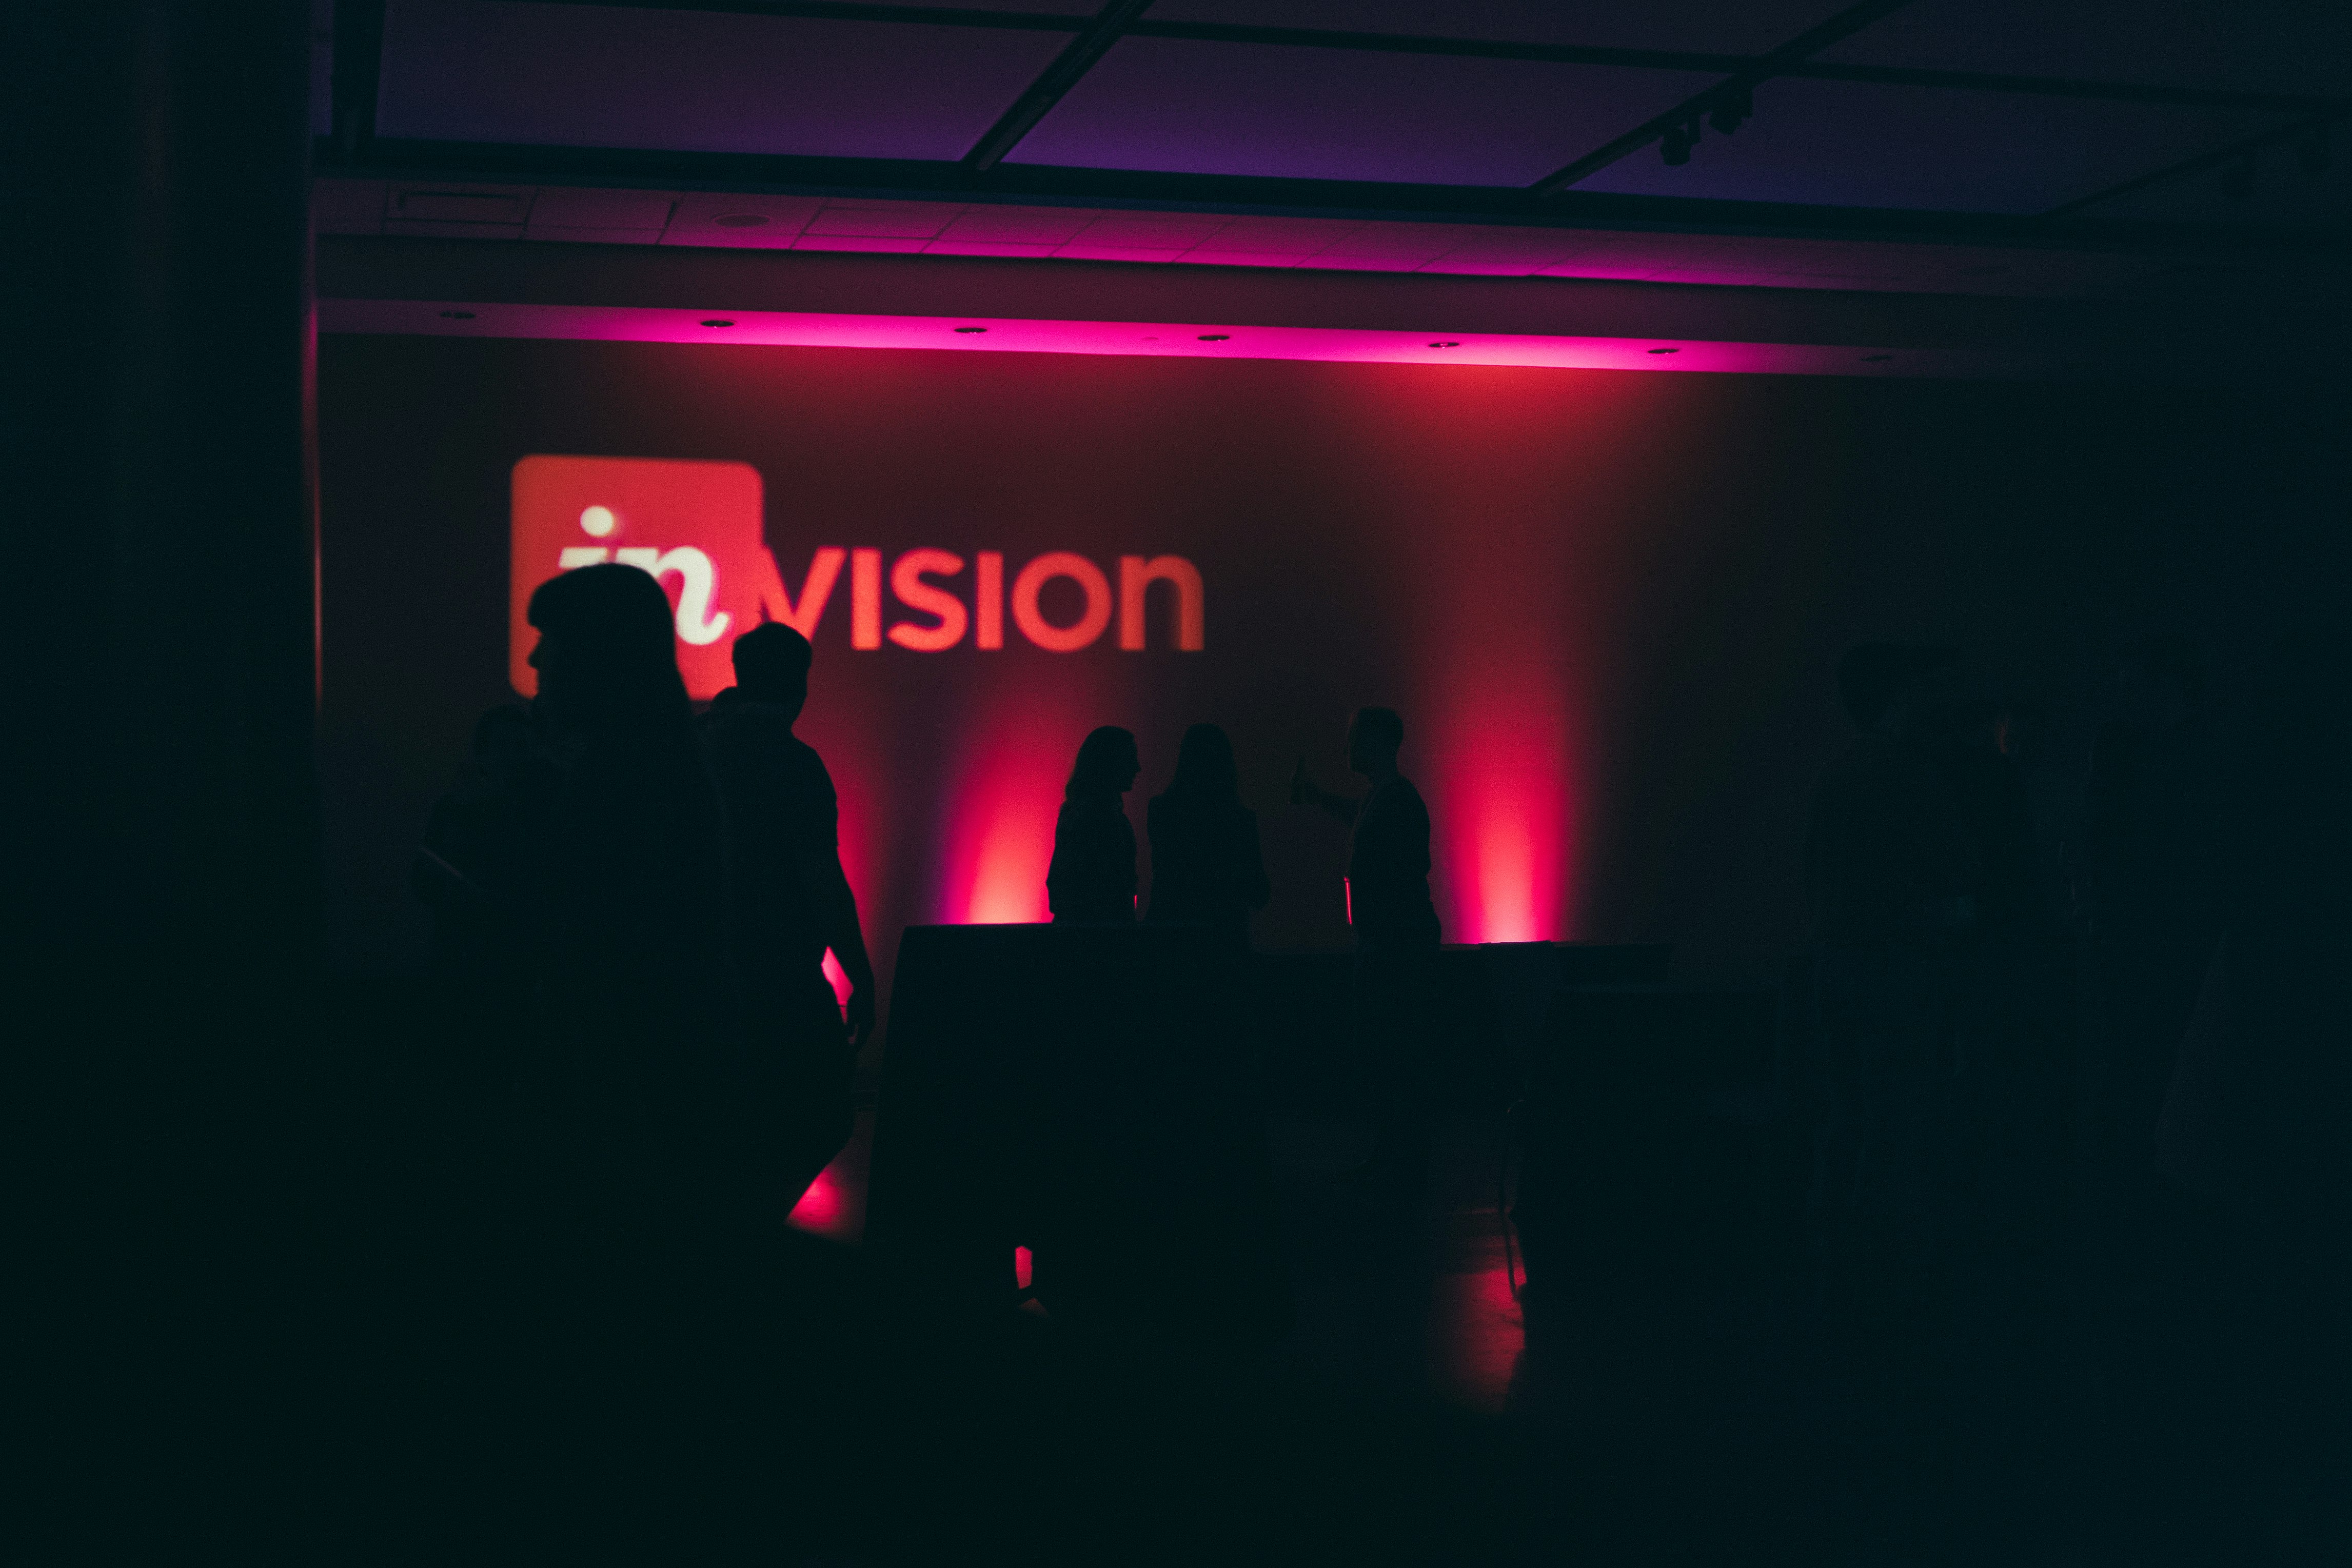 Invision hosted a dinner + drinks event in LA at the Annex, the lighting was really cool.